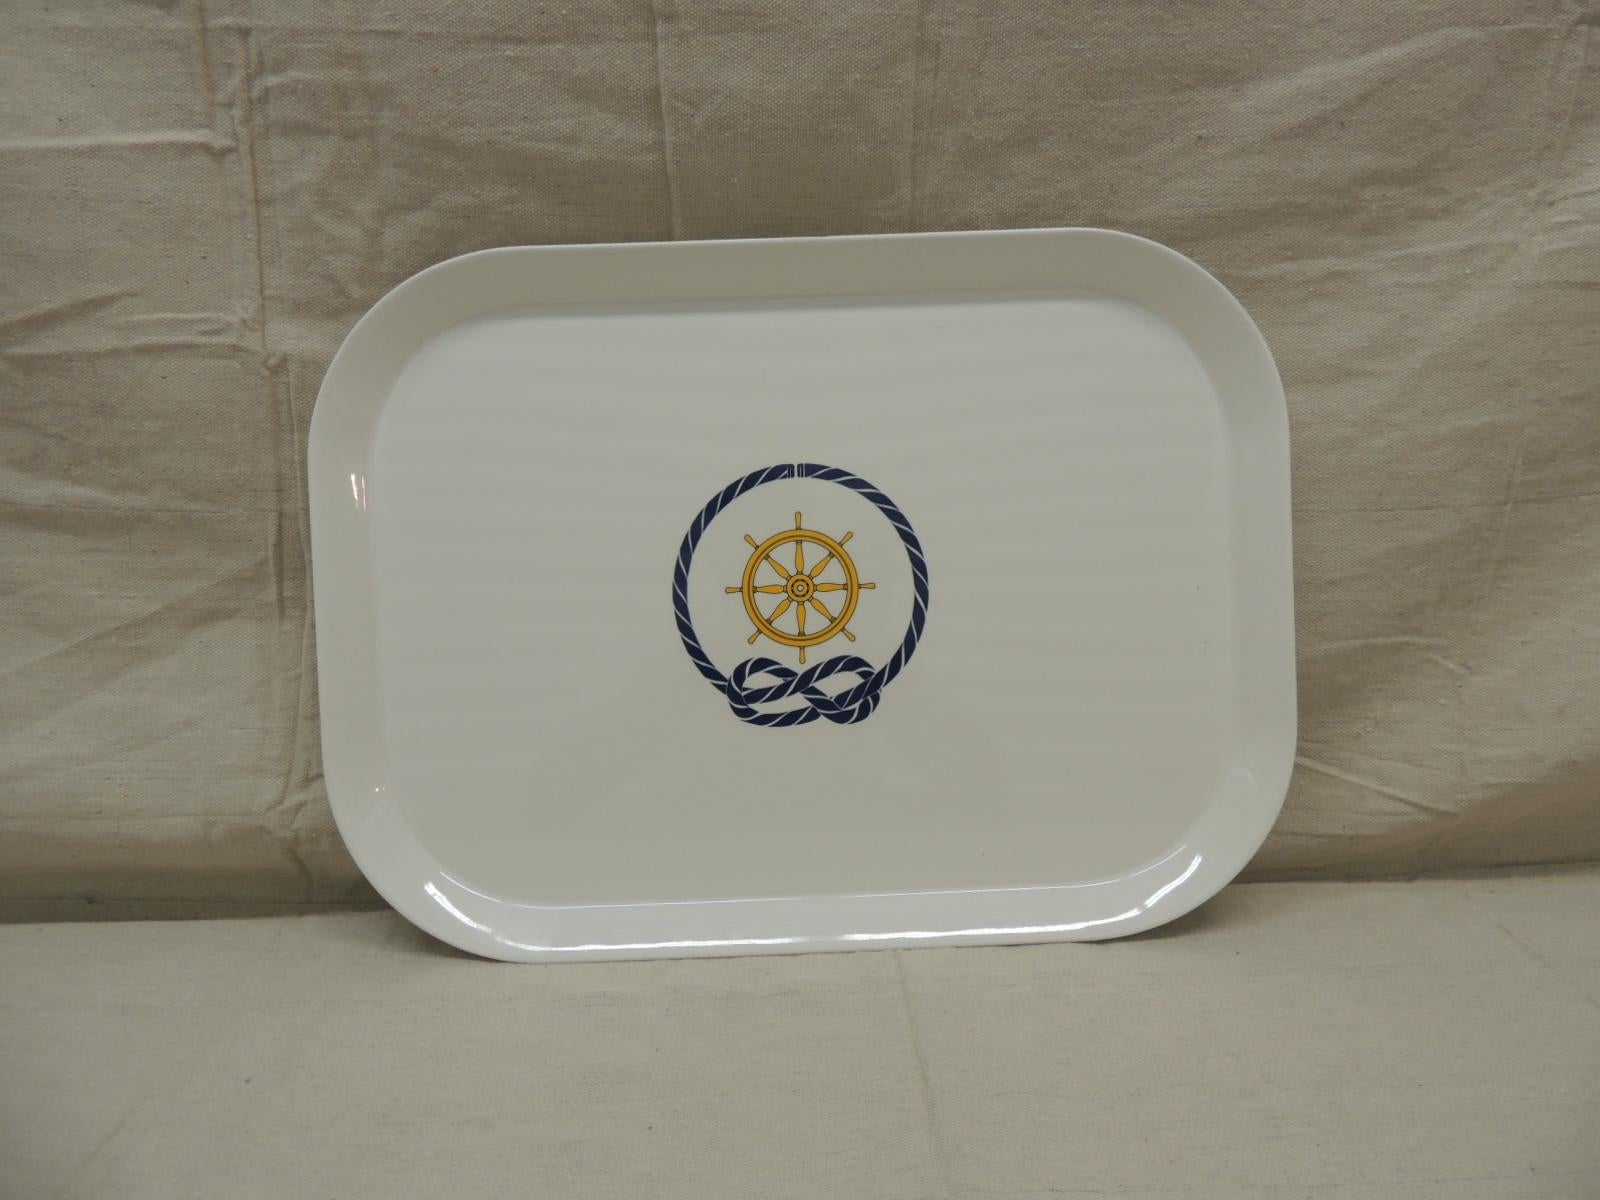 Blue, yellow and white nautical theme oval tray.
Rope and anchor design.
Carta fina, Verona, Italy
Size: 17.5 x 13 D x 0.75 H.
 